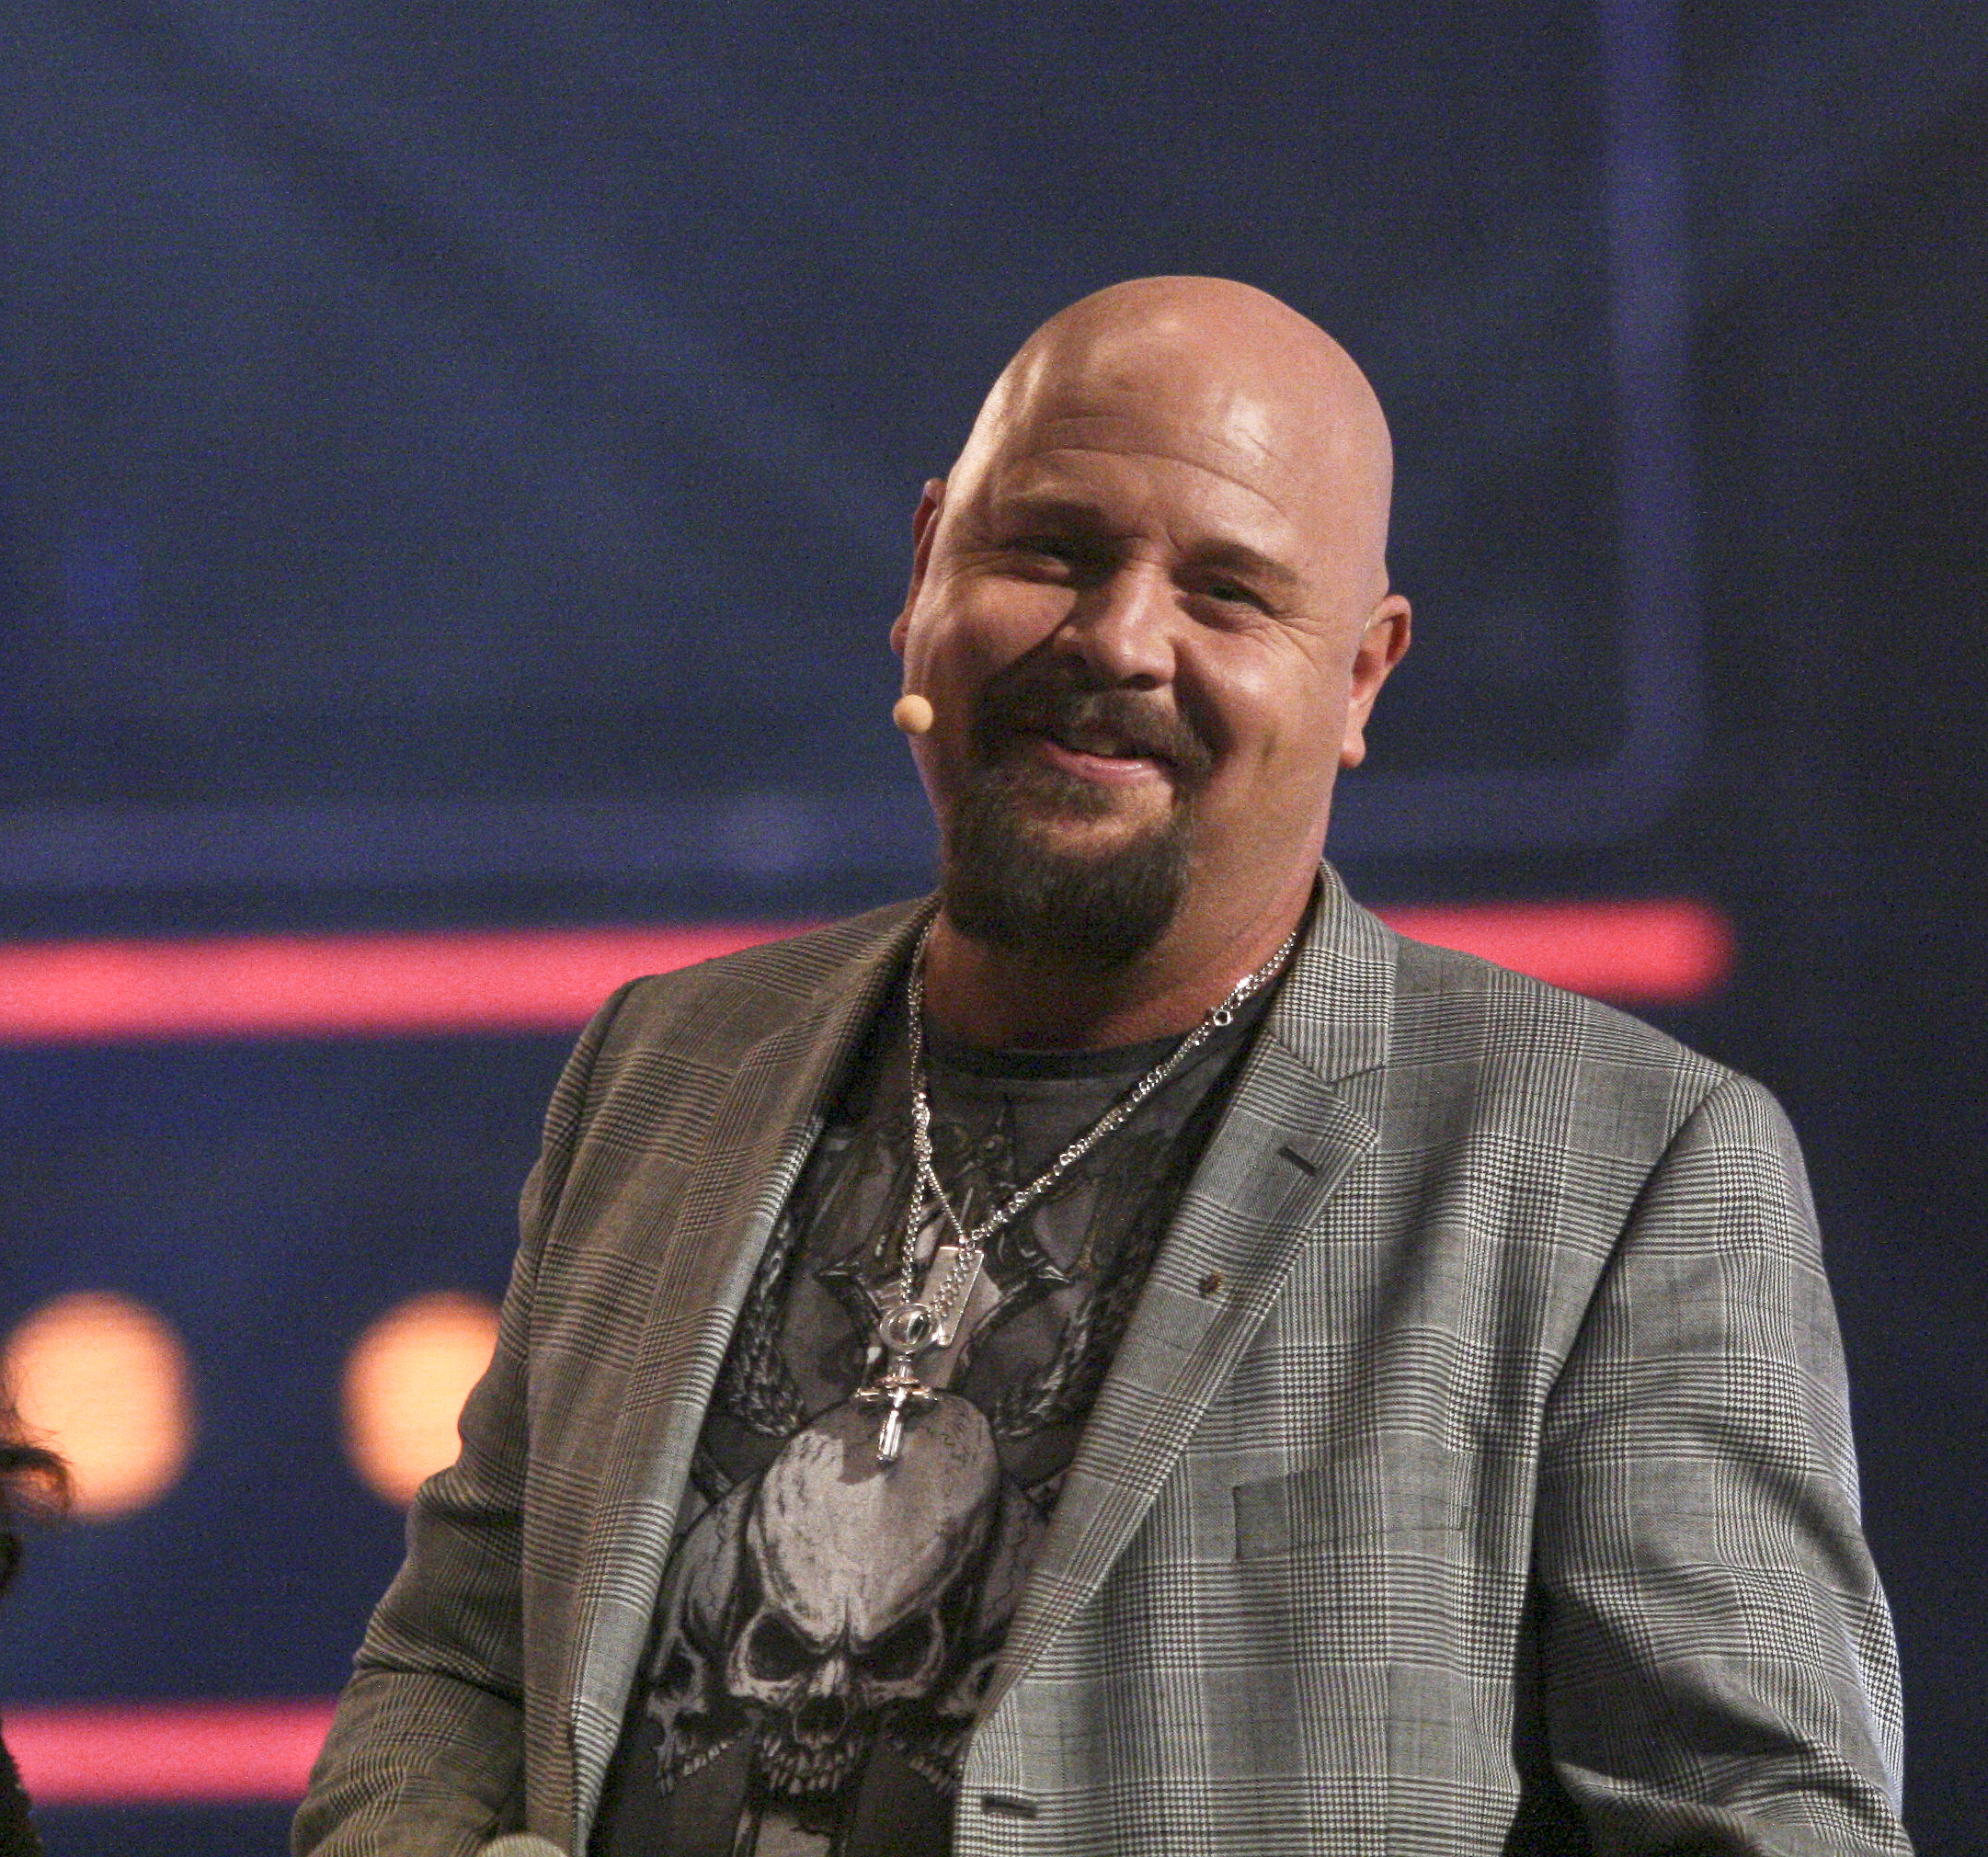 Eurovision Song Contest, Azerbajdzjan, Anders Bagge, Norge